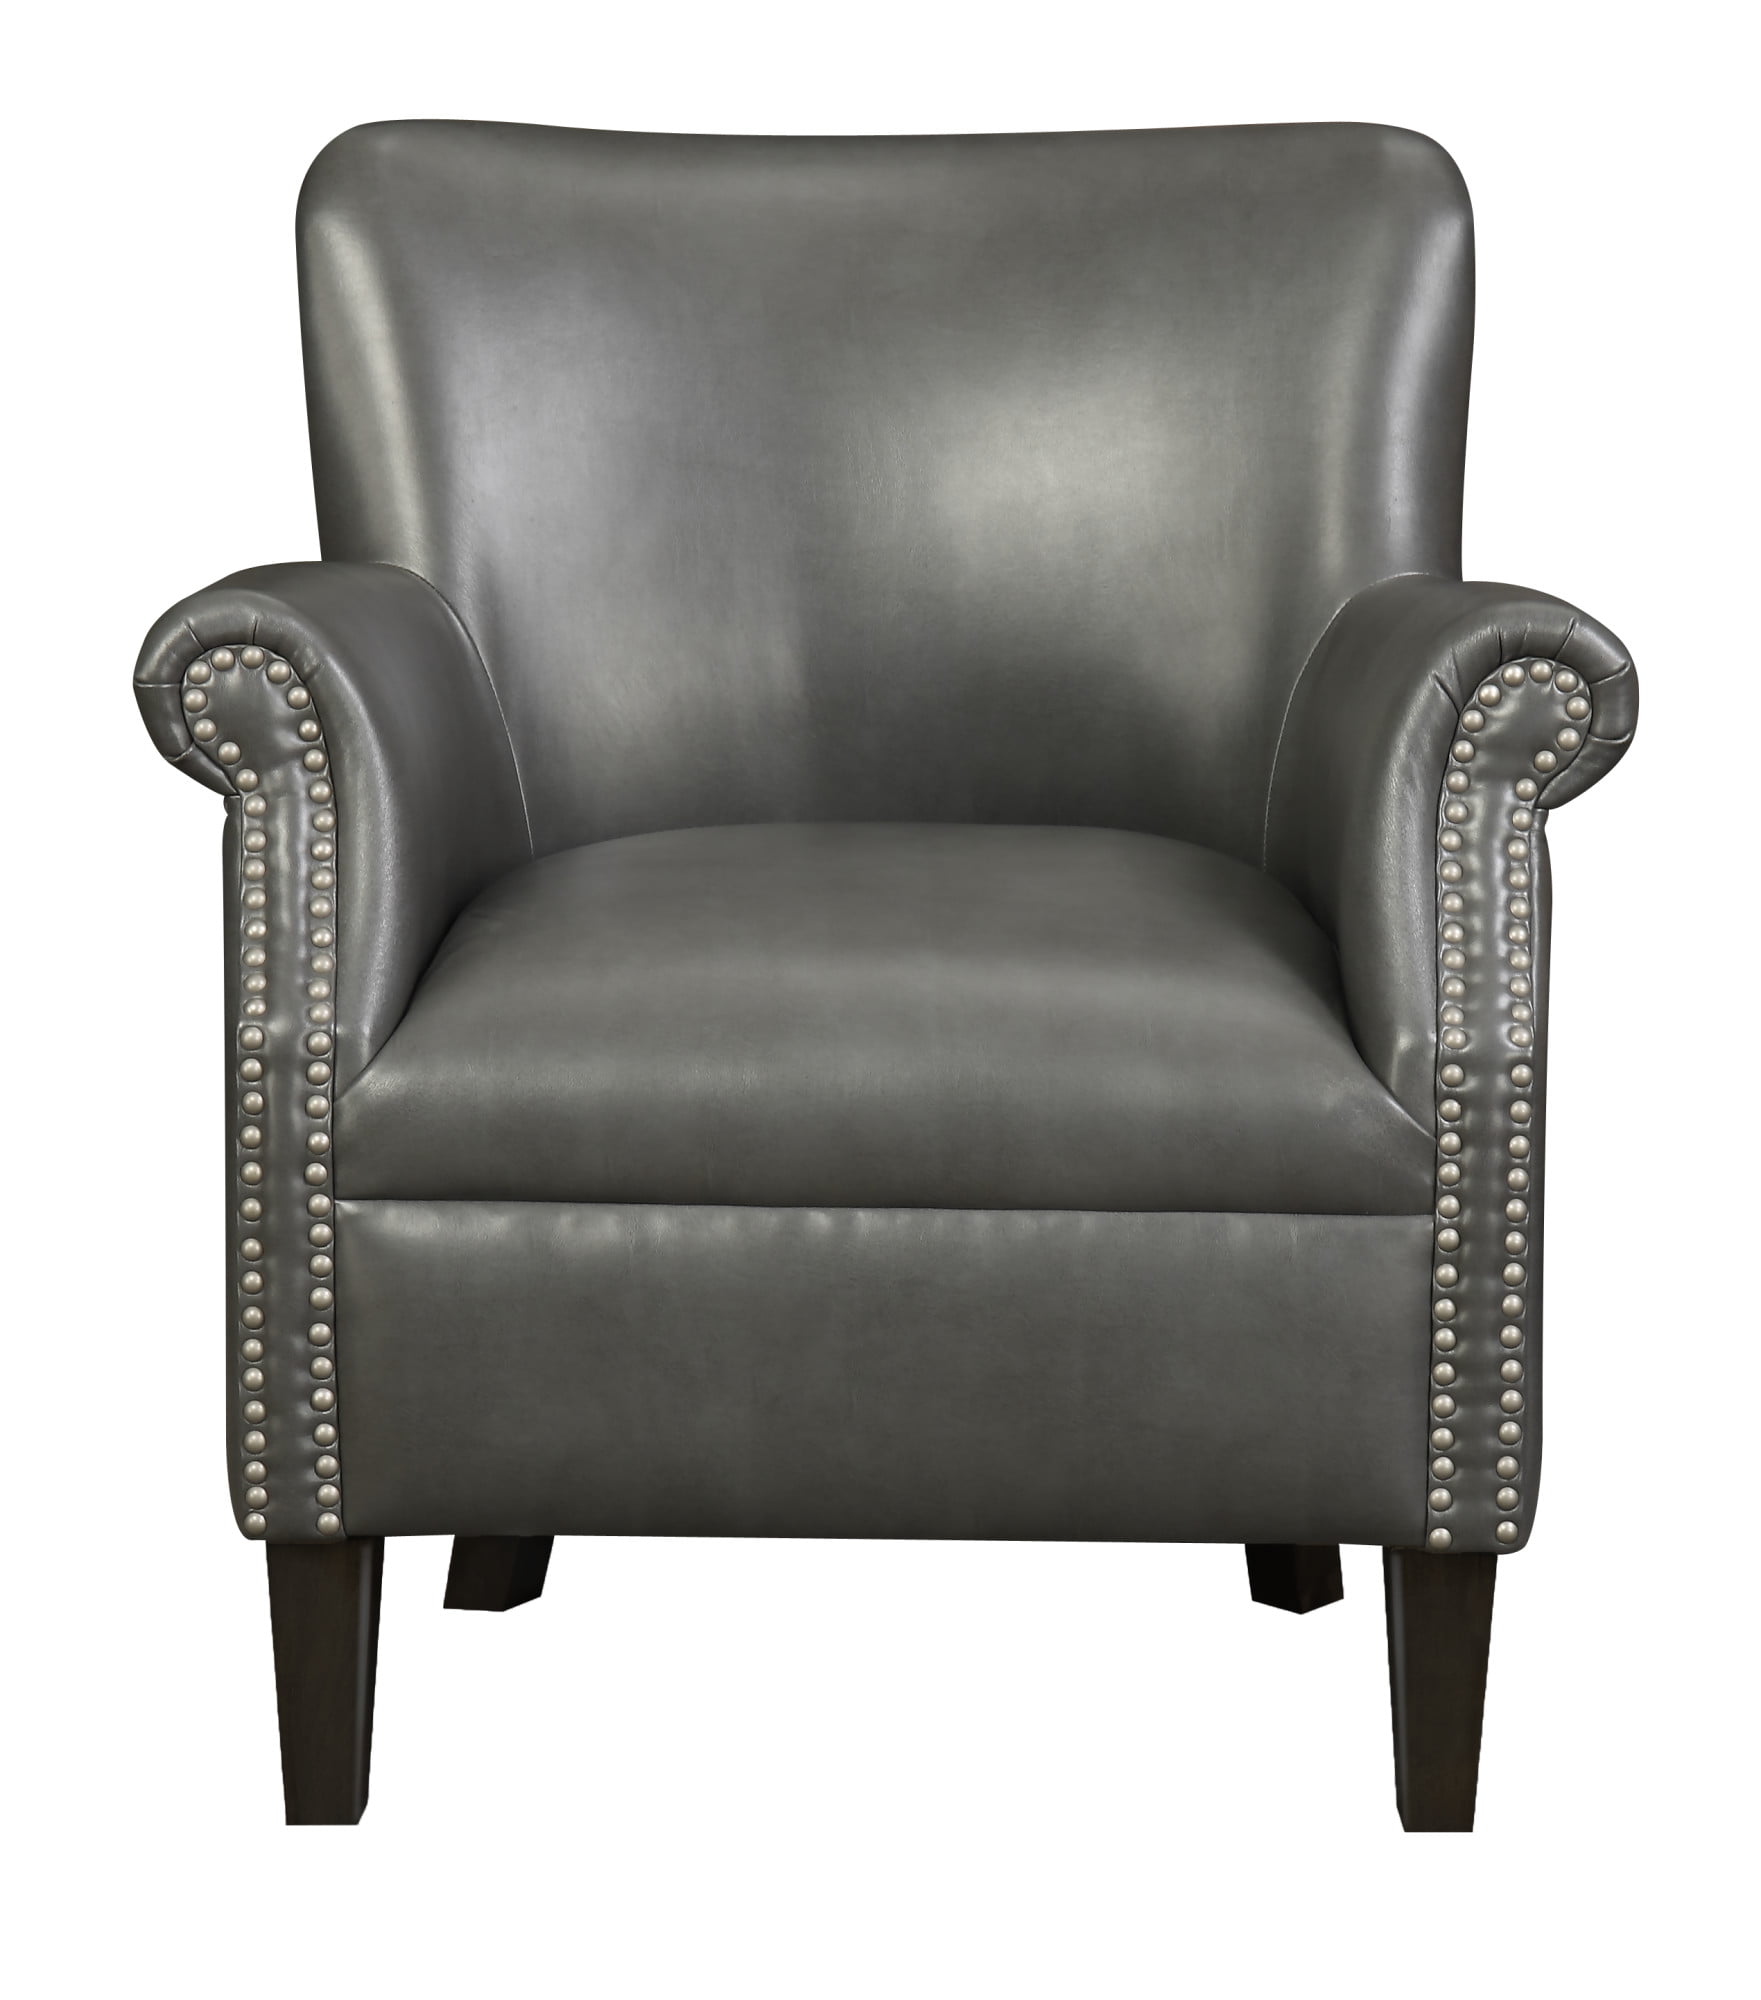 Emerald Home Oscar Gray Accent Chair with Faux Leather Upholstery And